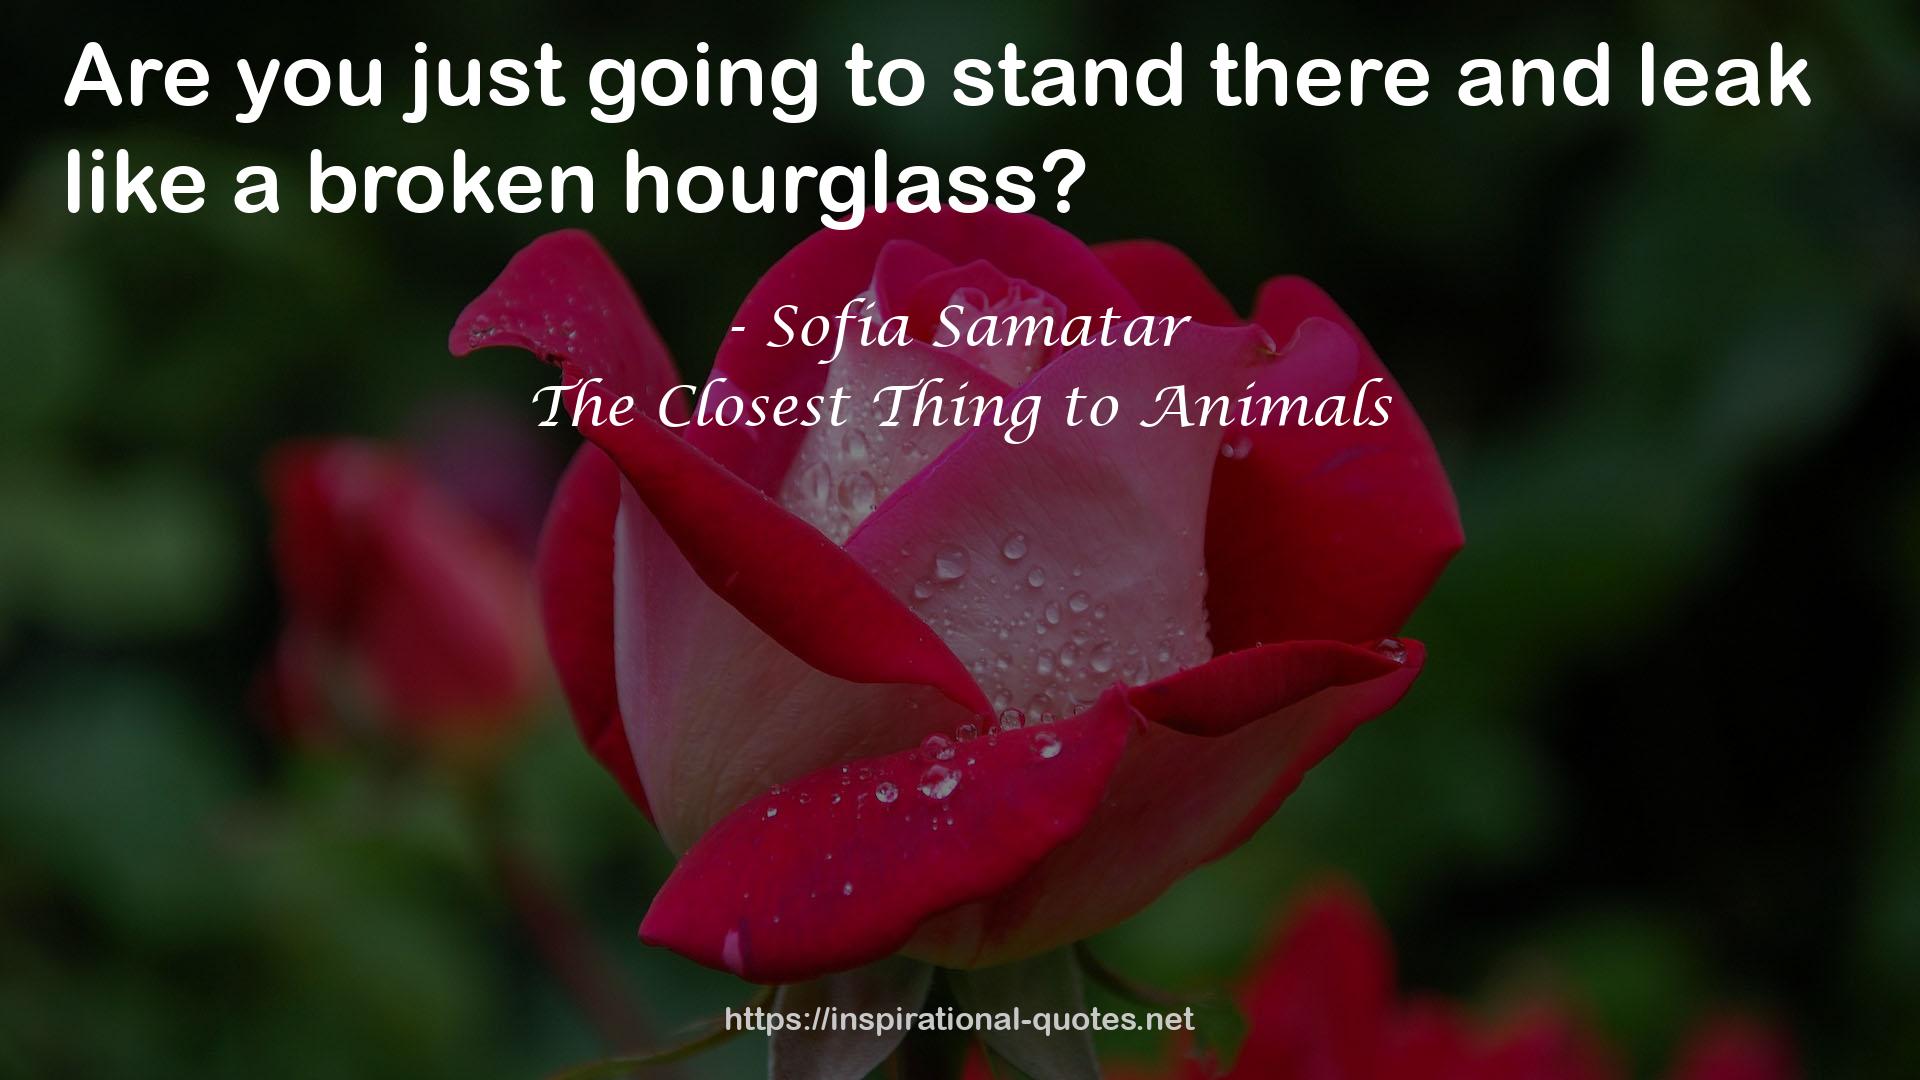 The Closest Thing to Animals QUOTES